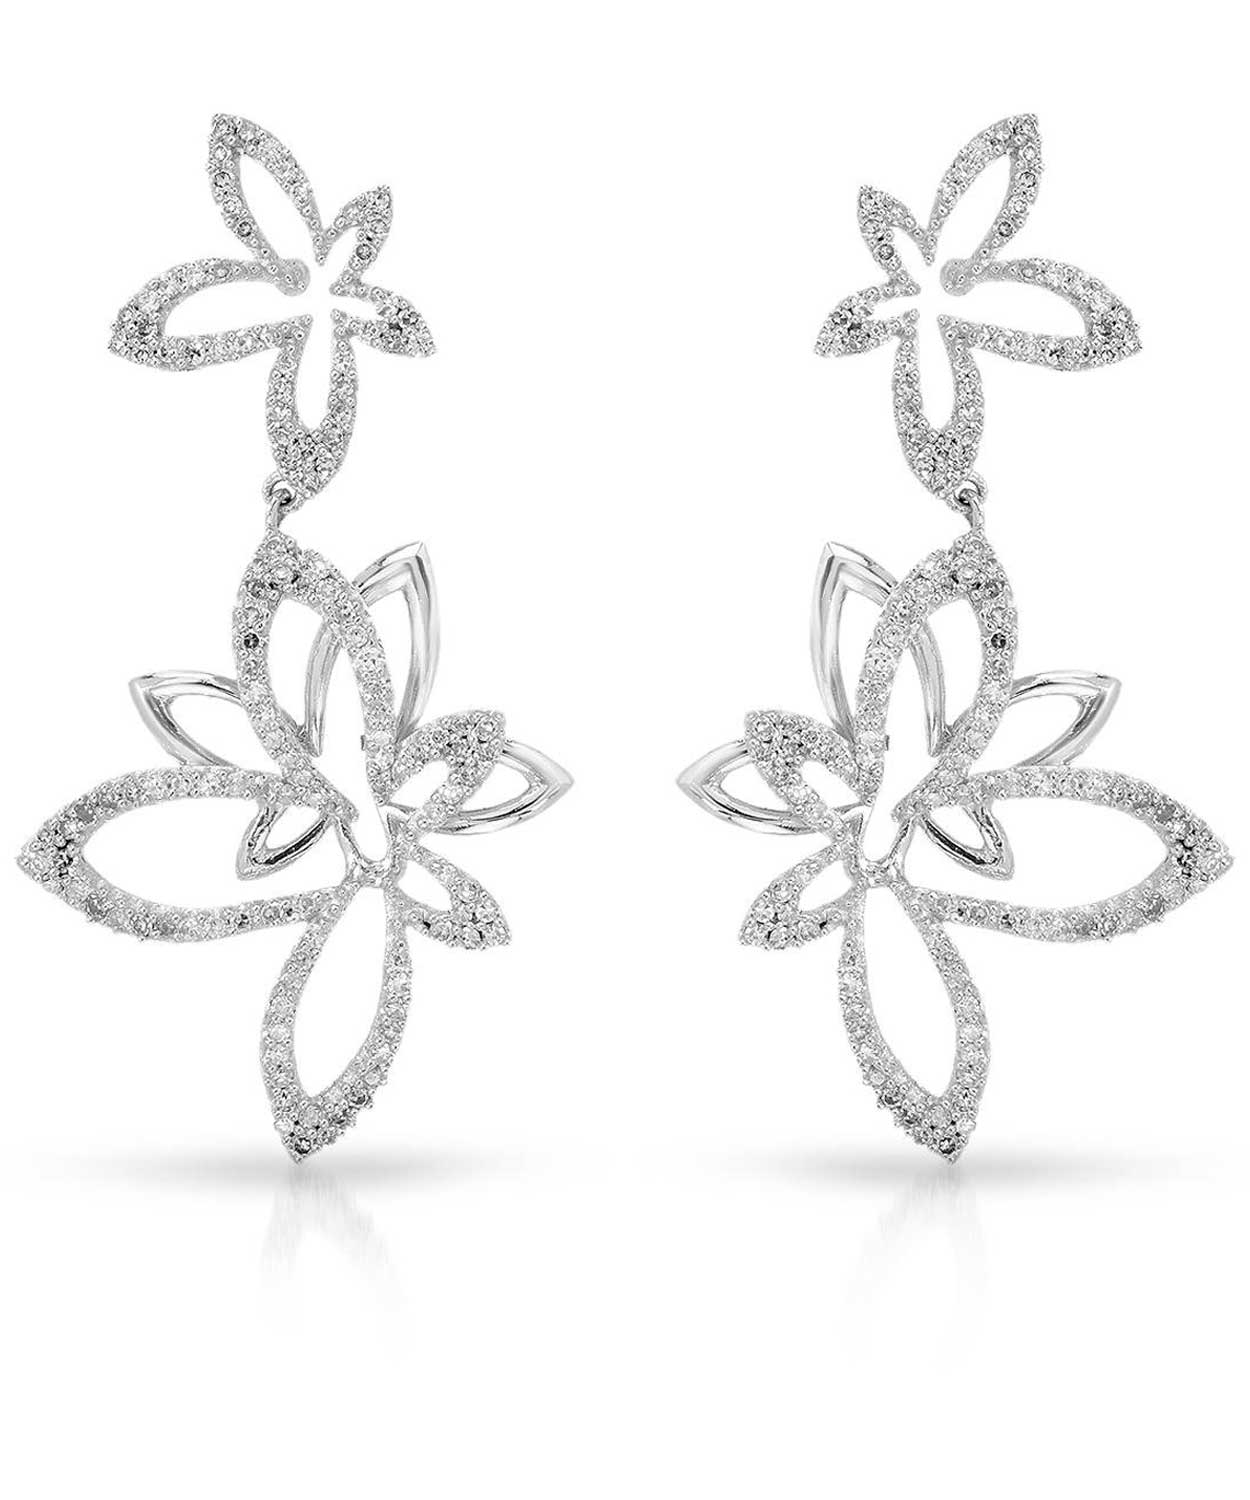 Glamour Collection 0.75 ctw Diamond 14k White Gold Flower Dangle Earrings View 1